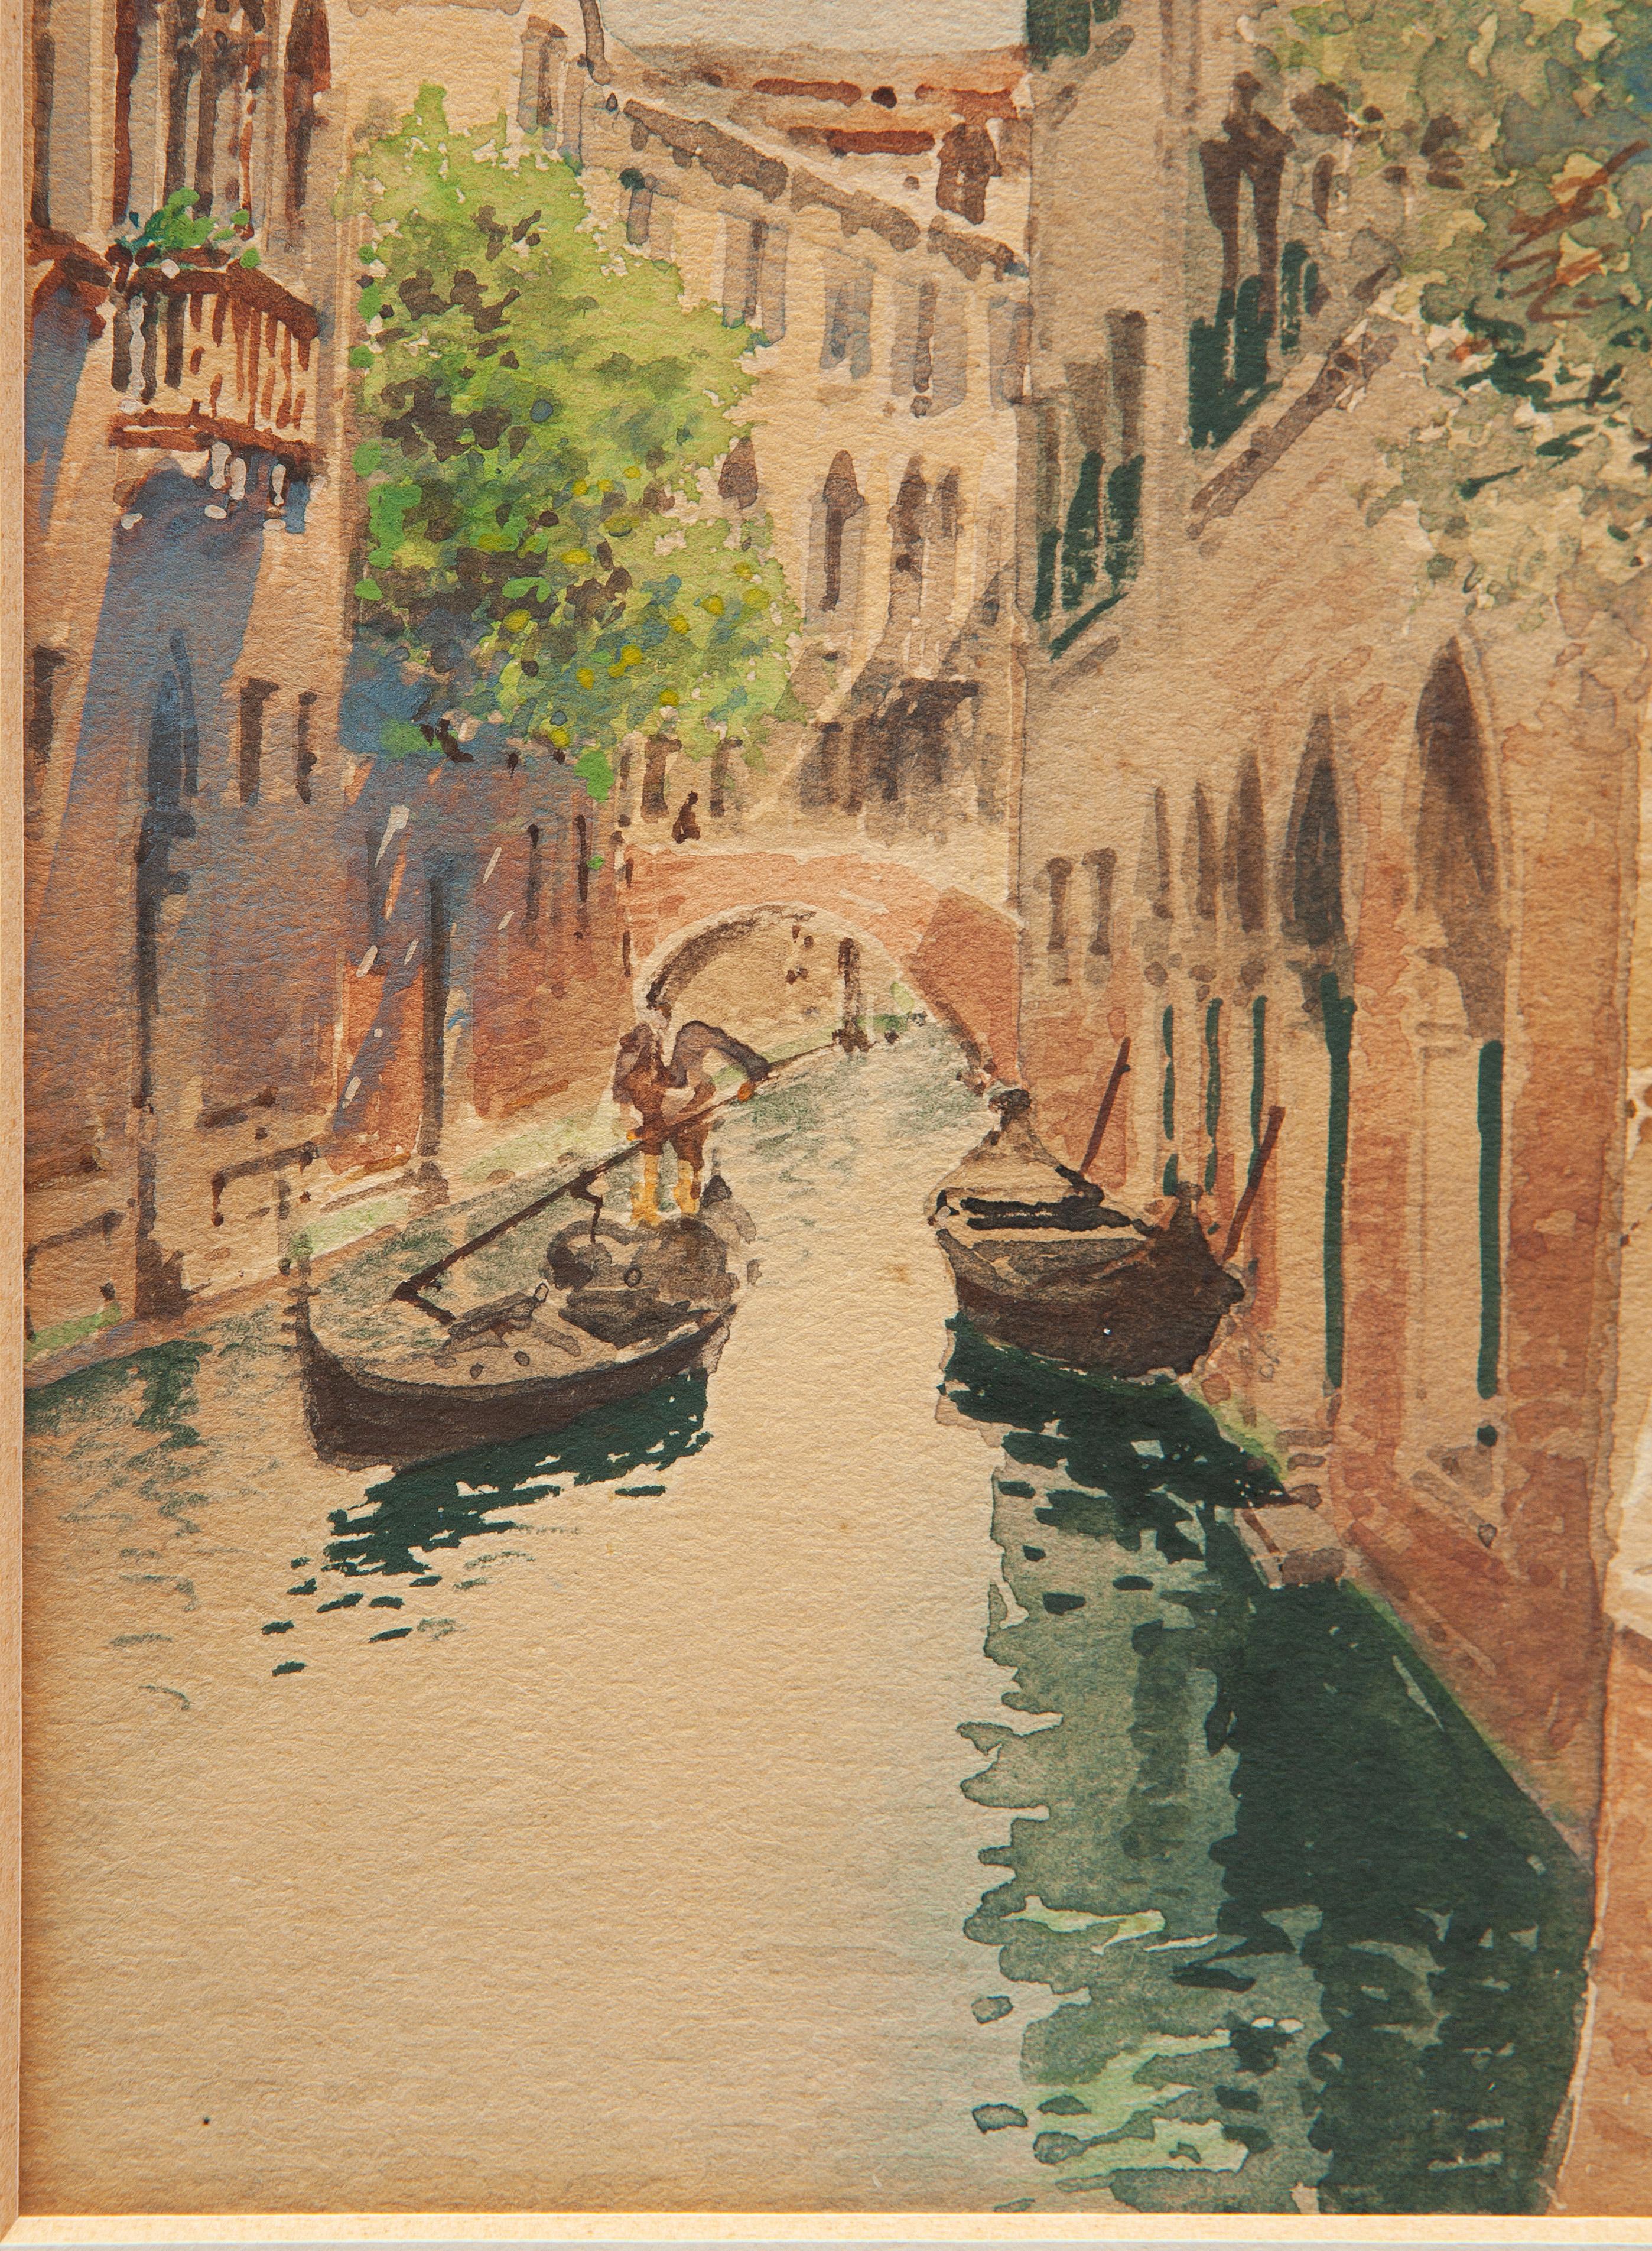 Andrea Biondetti (1851-1946)

Canal with gondola in Venice
Watercolor painting on paper
Size: 24x15 cm  (48x39 cm including the frame)
Last Quarter 19th Century
Signed lower right
The painting was framed with invisible glass